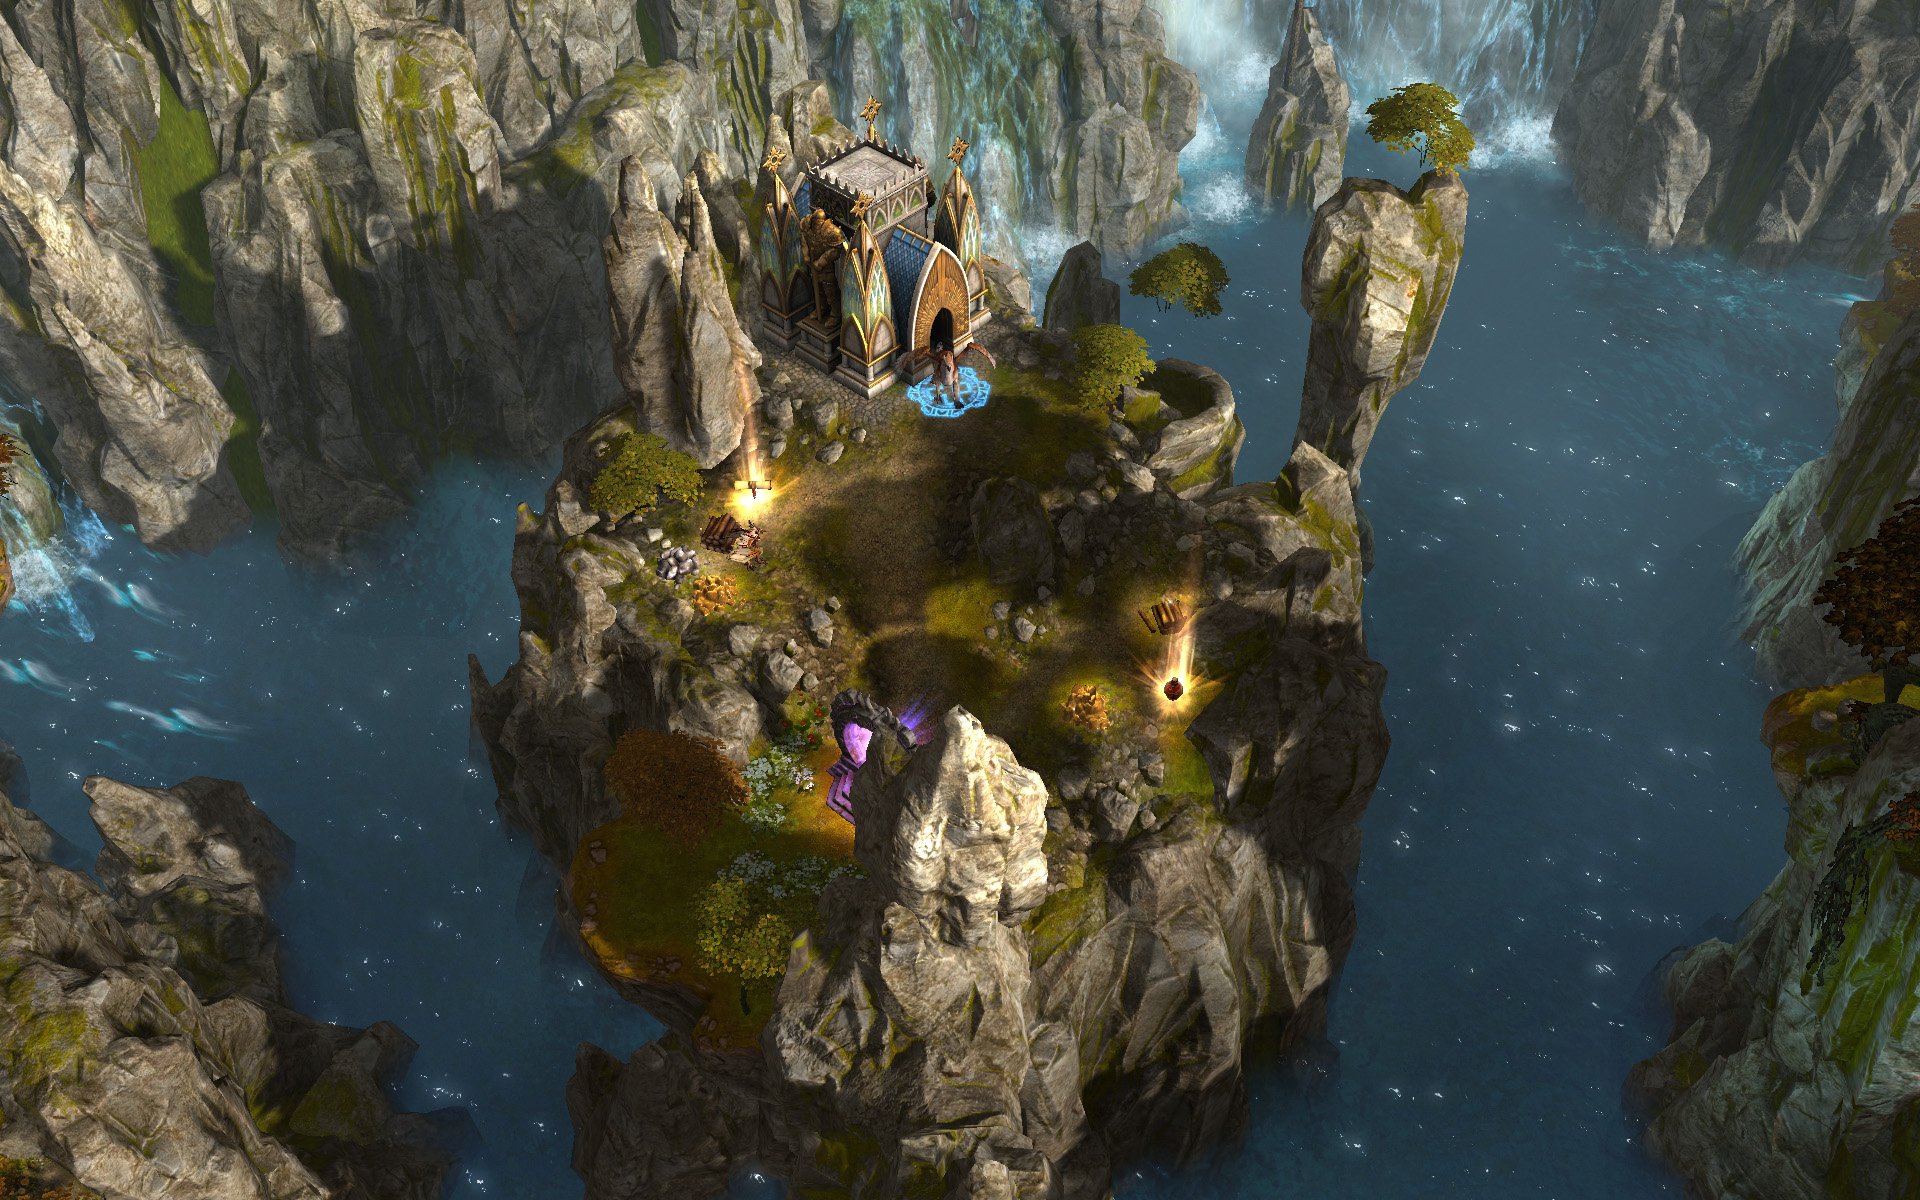   :  6 - Might and Magic: Heroes VI      Haven      ,   .